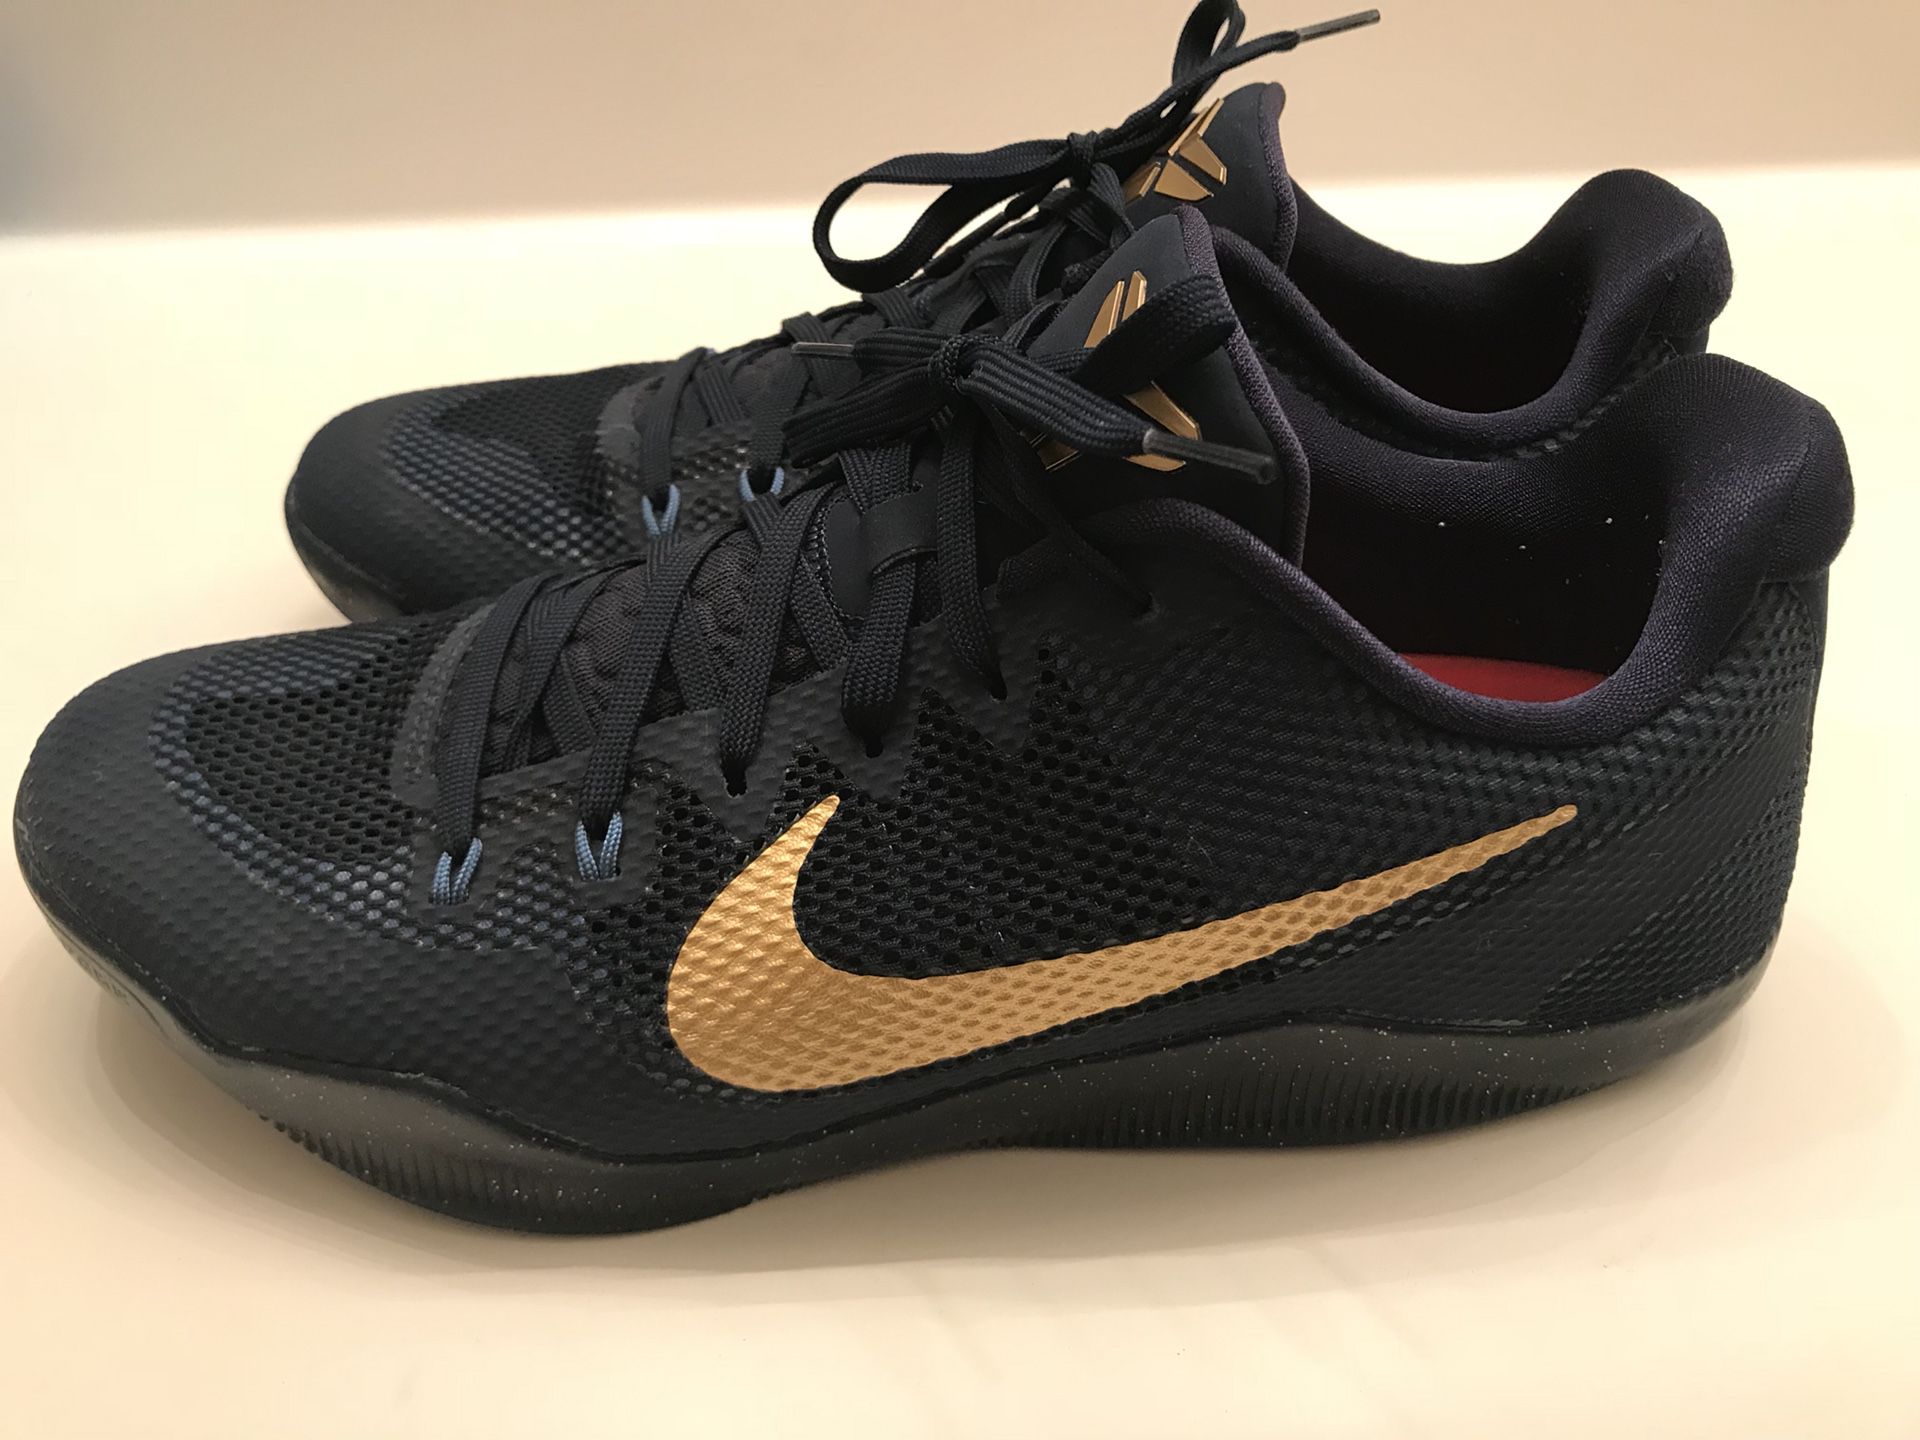 Nike Kobe 11 EM “Philippines” colorway for Sale in San CA - OfferUp